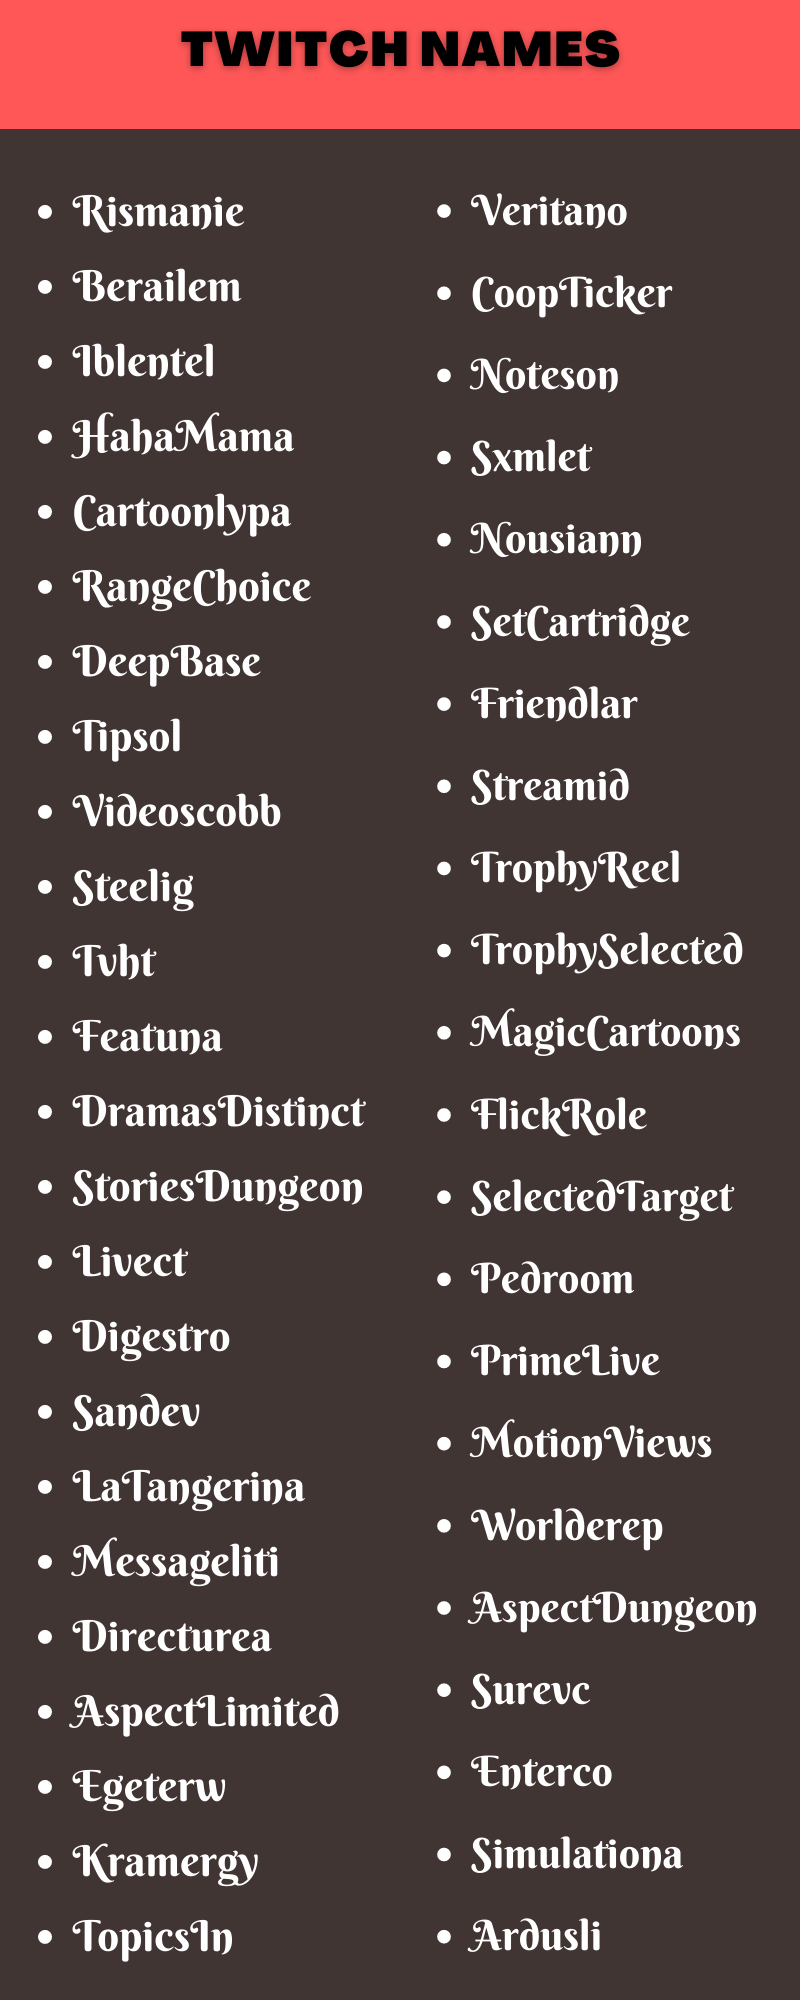 Twitch Names